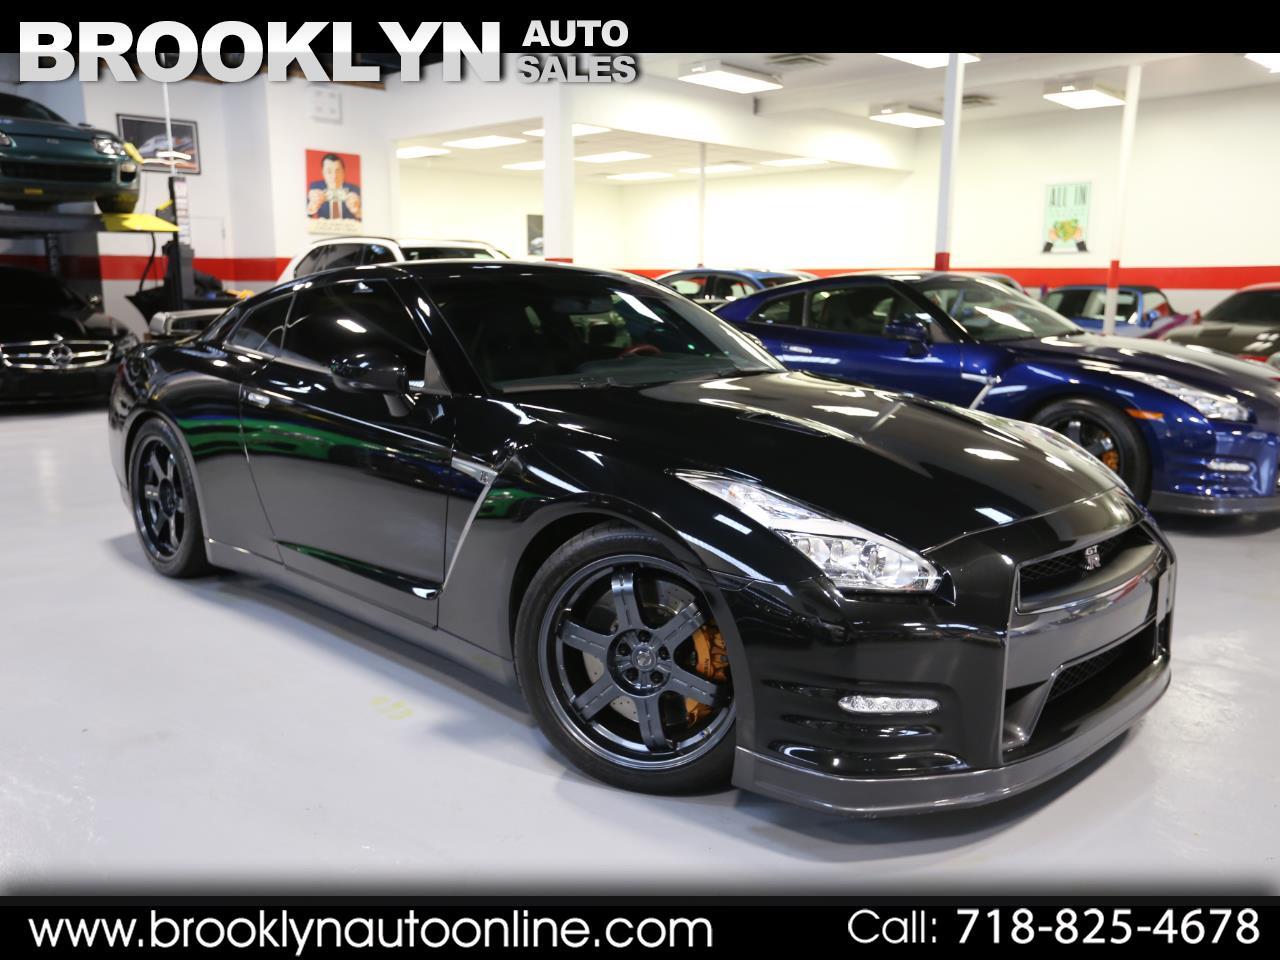 Used 2015 Nissan Gt R Black Edition 30k Miles For Sale In